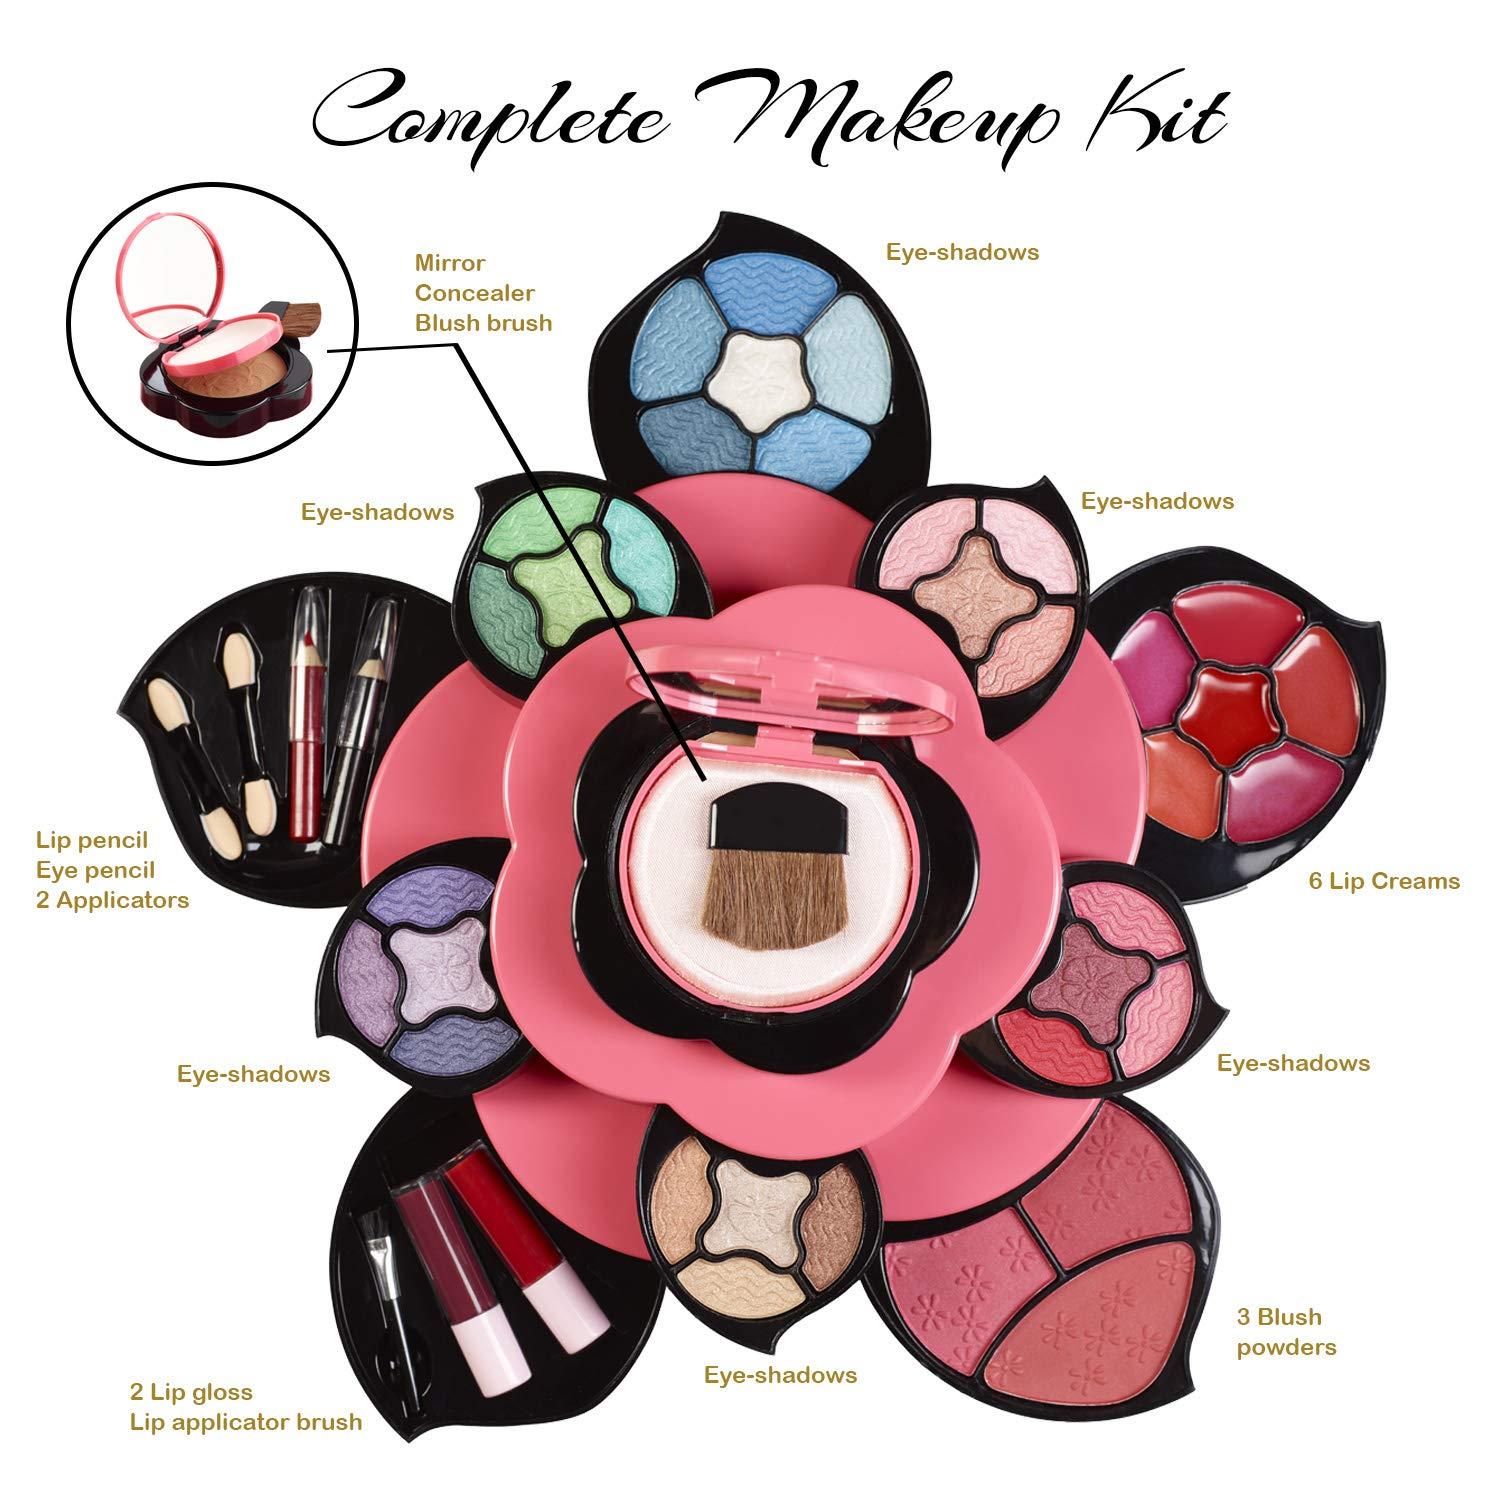 Toysical Makeup Kits for Teens - “LOVE” Make Up Gift Set for Young Teens or  Girls - Includes Eyeshadow Palette with Ultimate Color Combinations - Full  Starter Kit for Beginners 